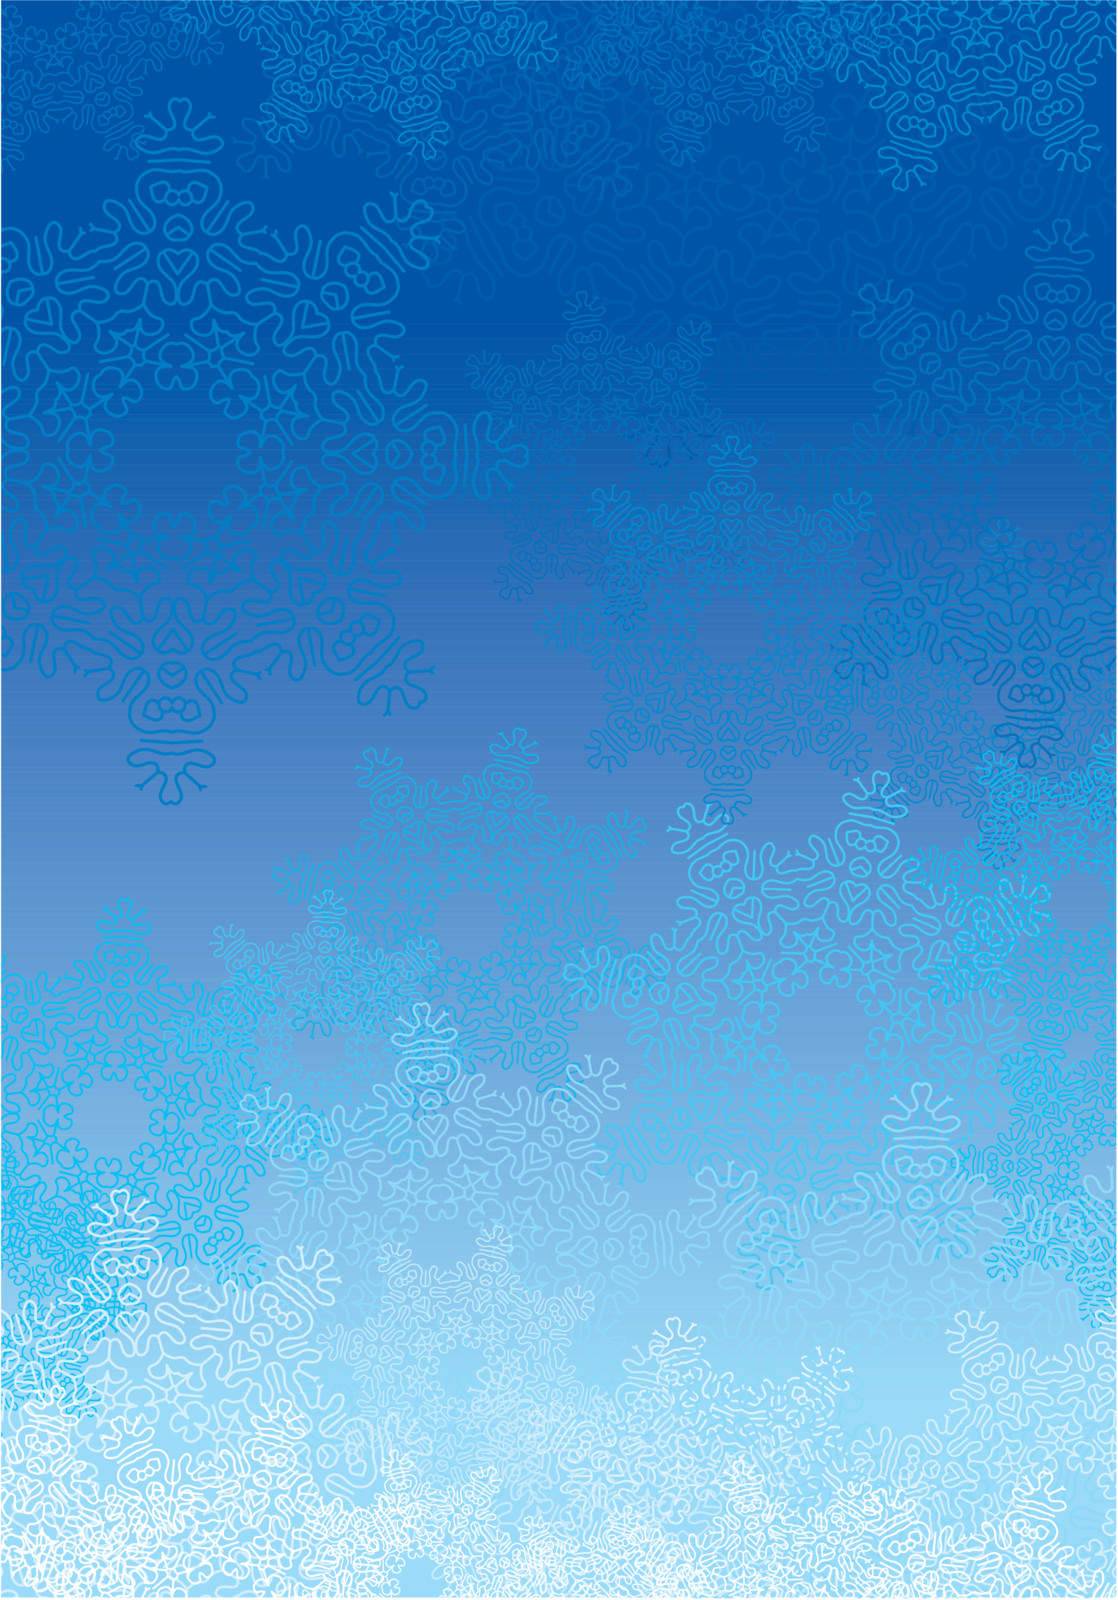 Abstract blue christmas background with giant snowflakes.
All elements are separated for better edit.